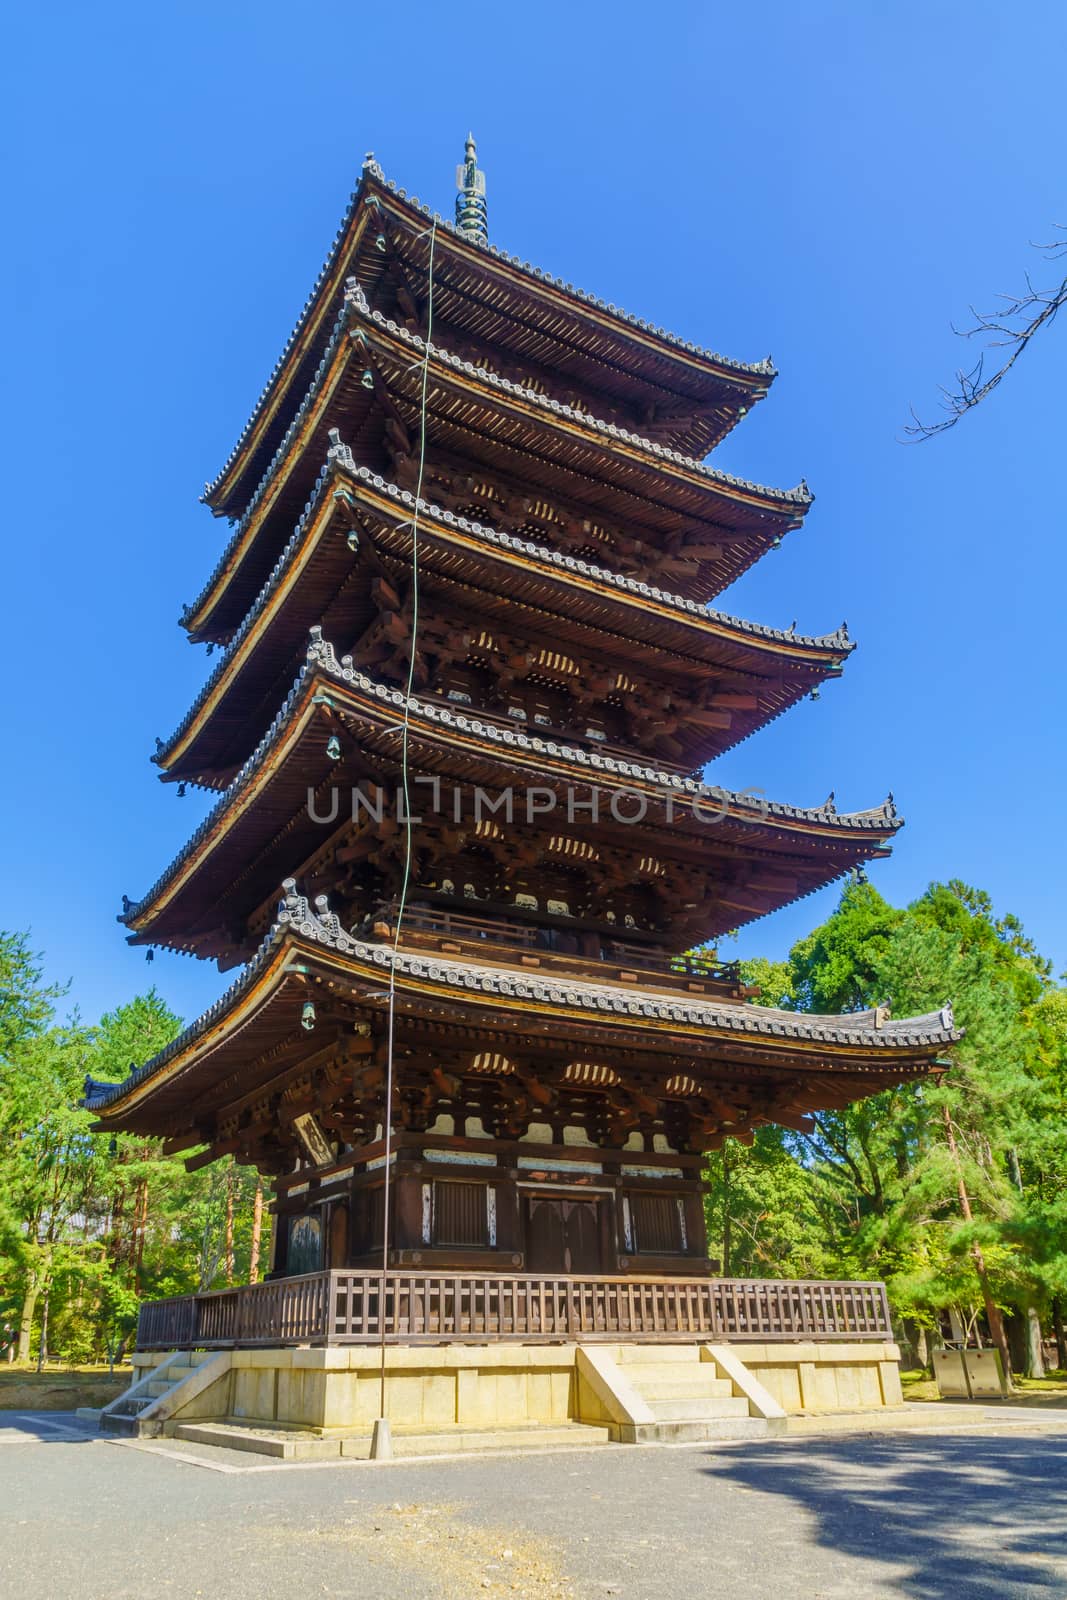 View of the Five Storied Pagoda of the Ninna-ji Temple, in Kyoto, Japan